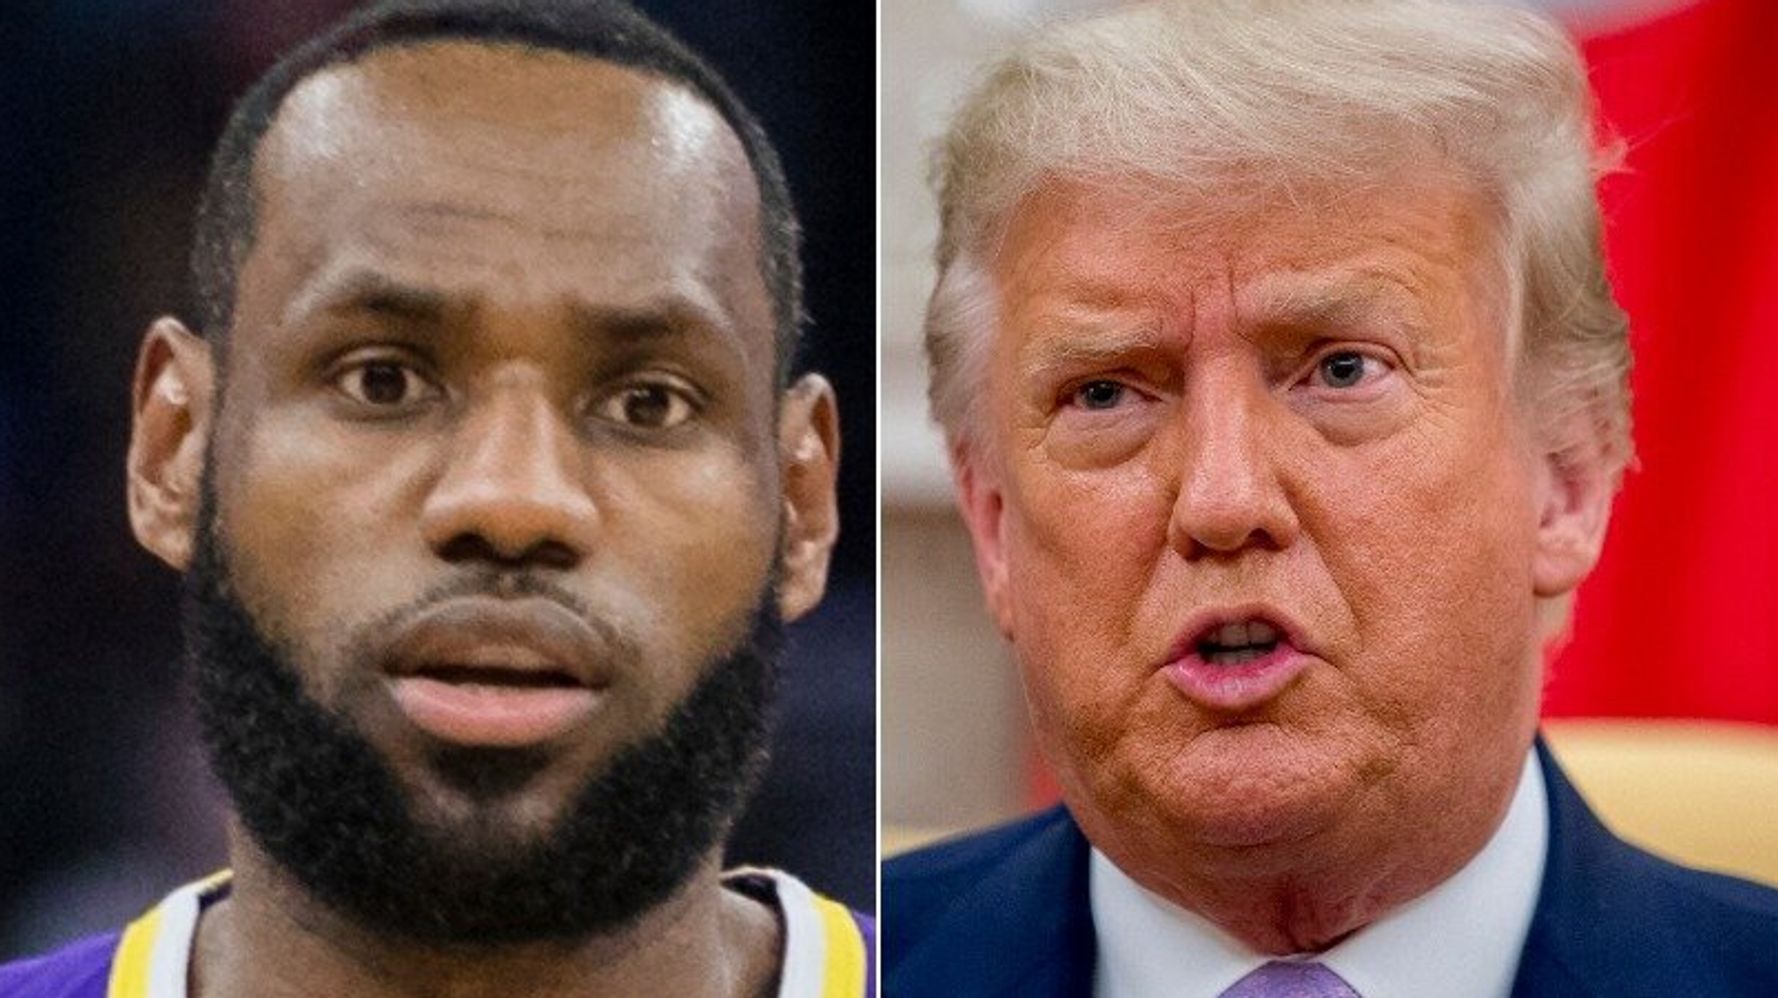 NBA: LeBron James and the Lakers want to visit White House But only when  Biden's sworn in